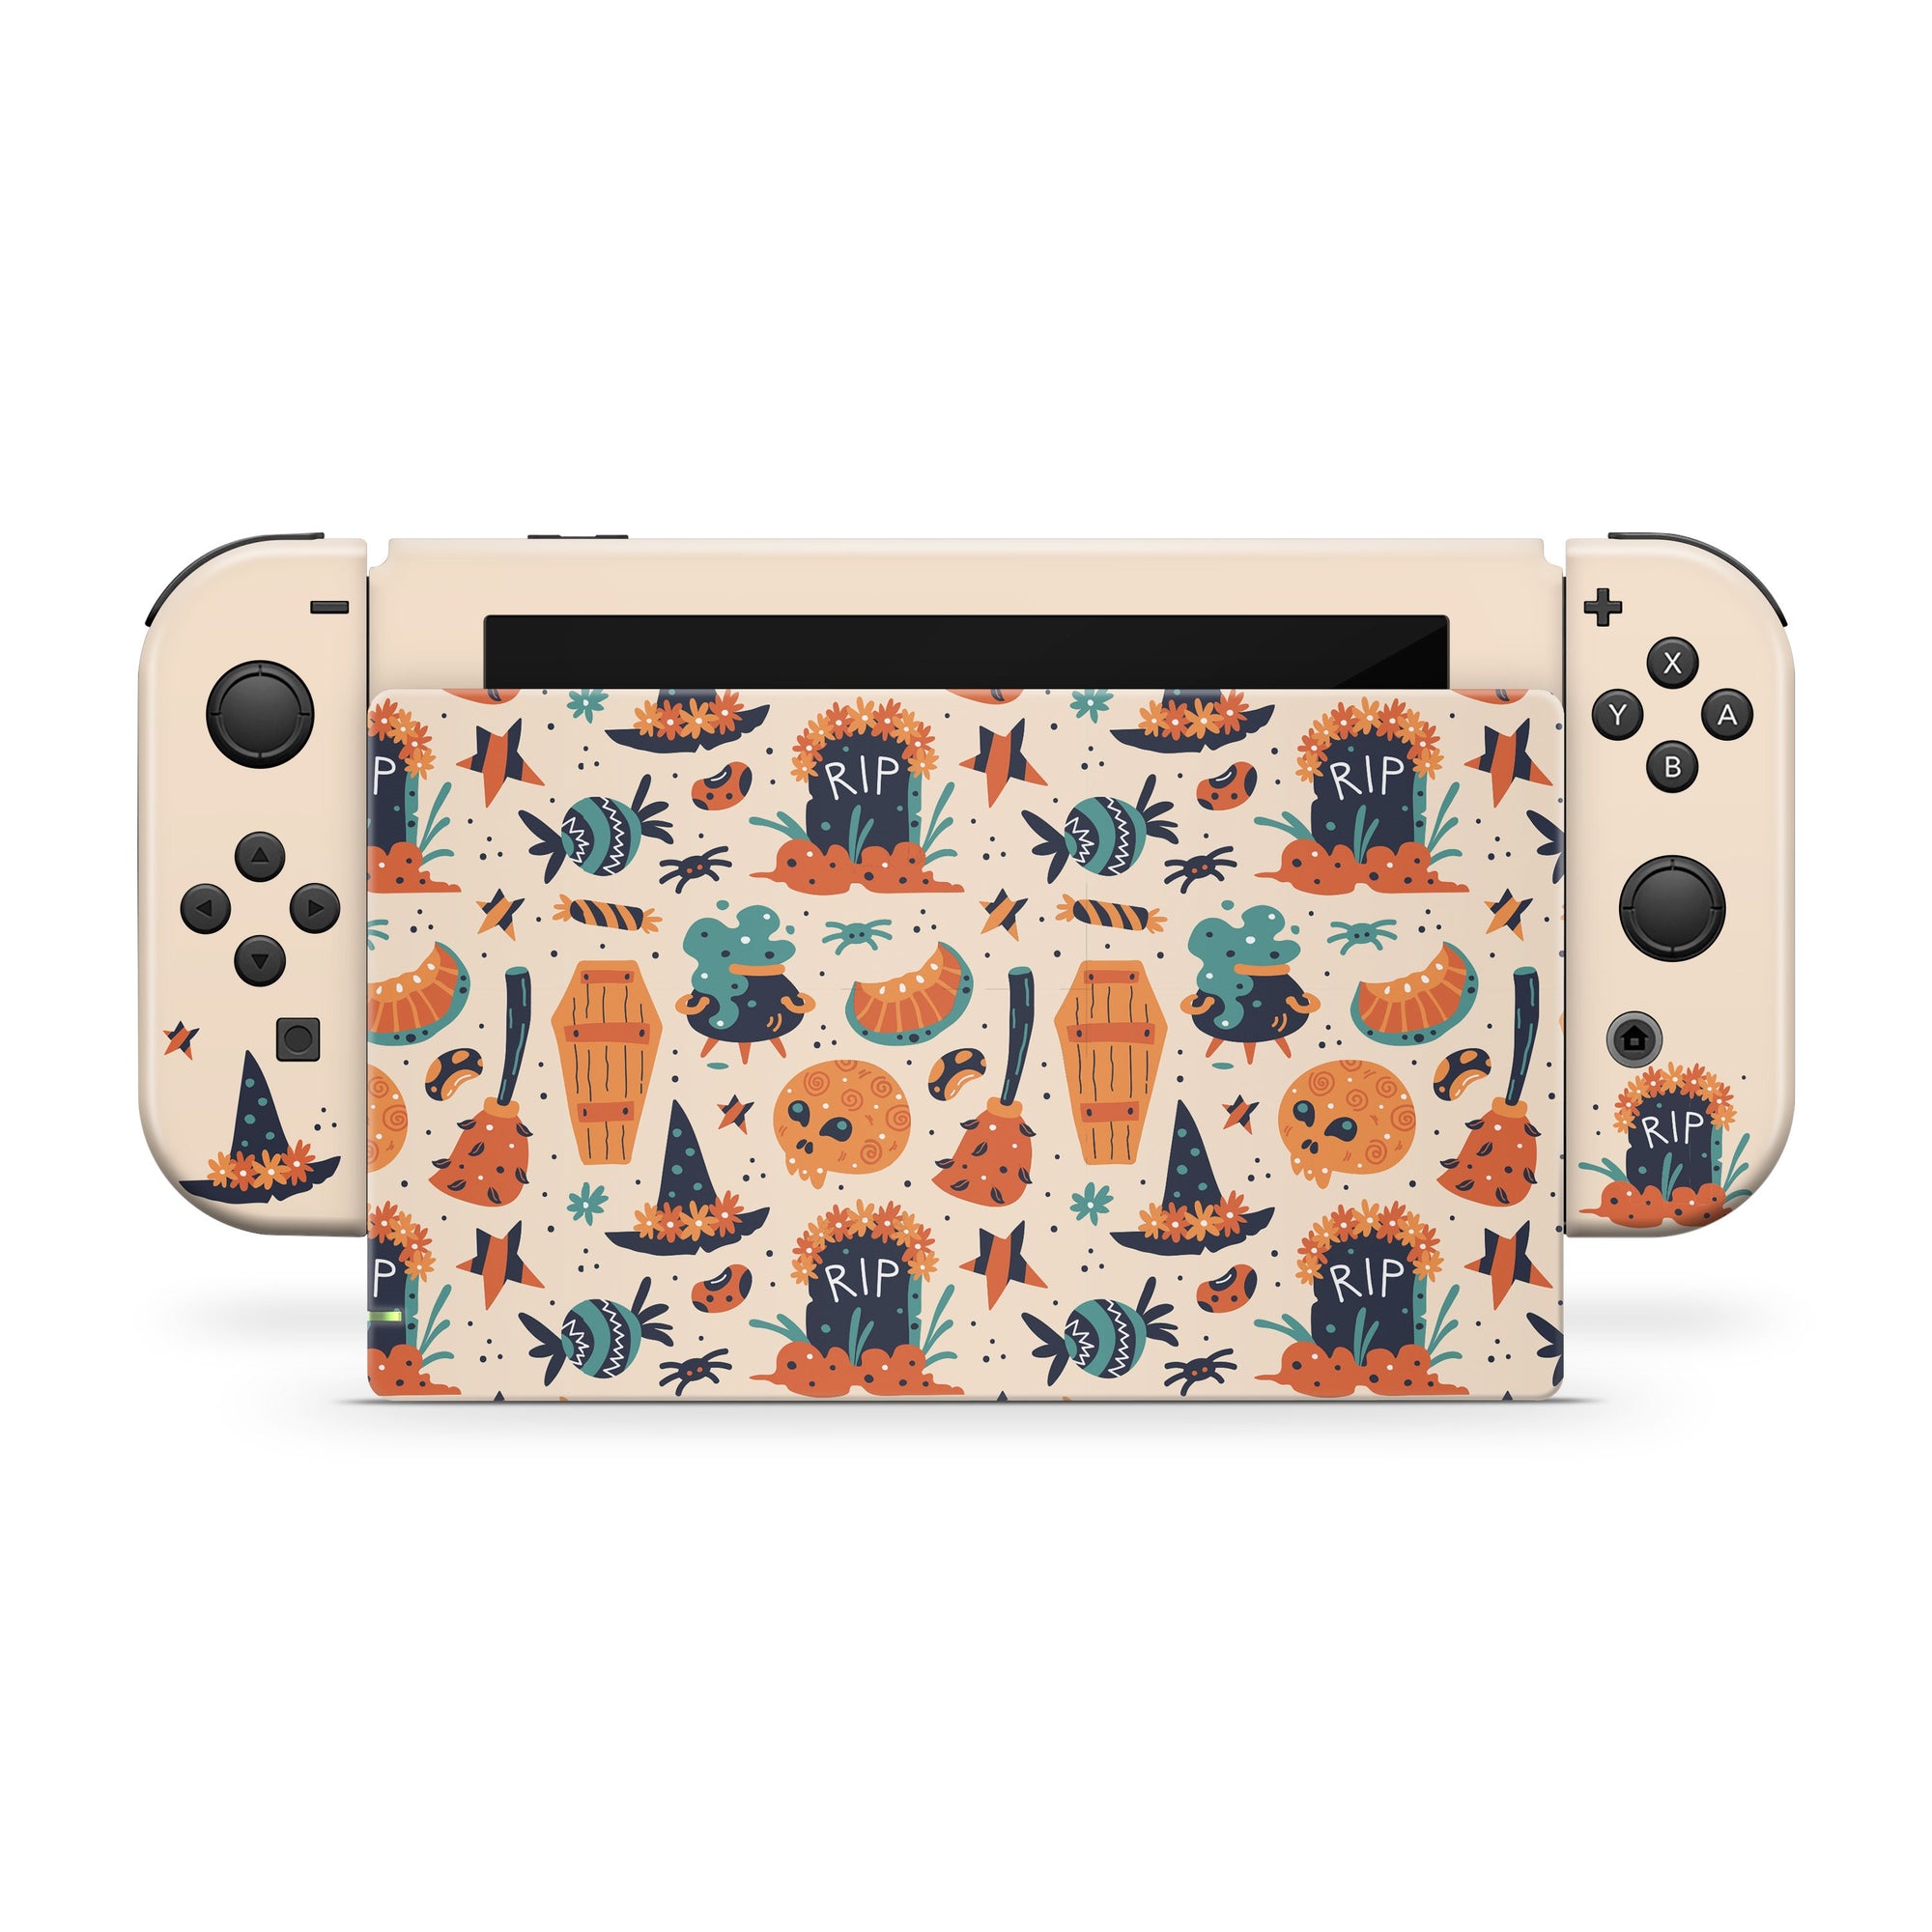 Halloween nintendo switches skin spooky Pumpkin ,Beige Witch switch skin Full cover decal vinyl 3m stickers